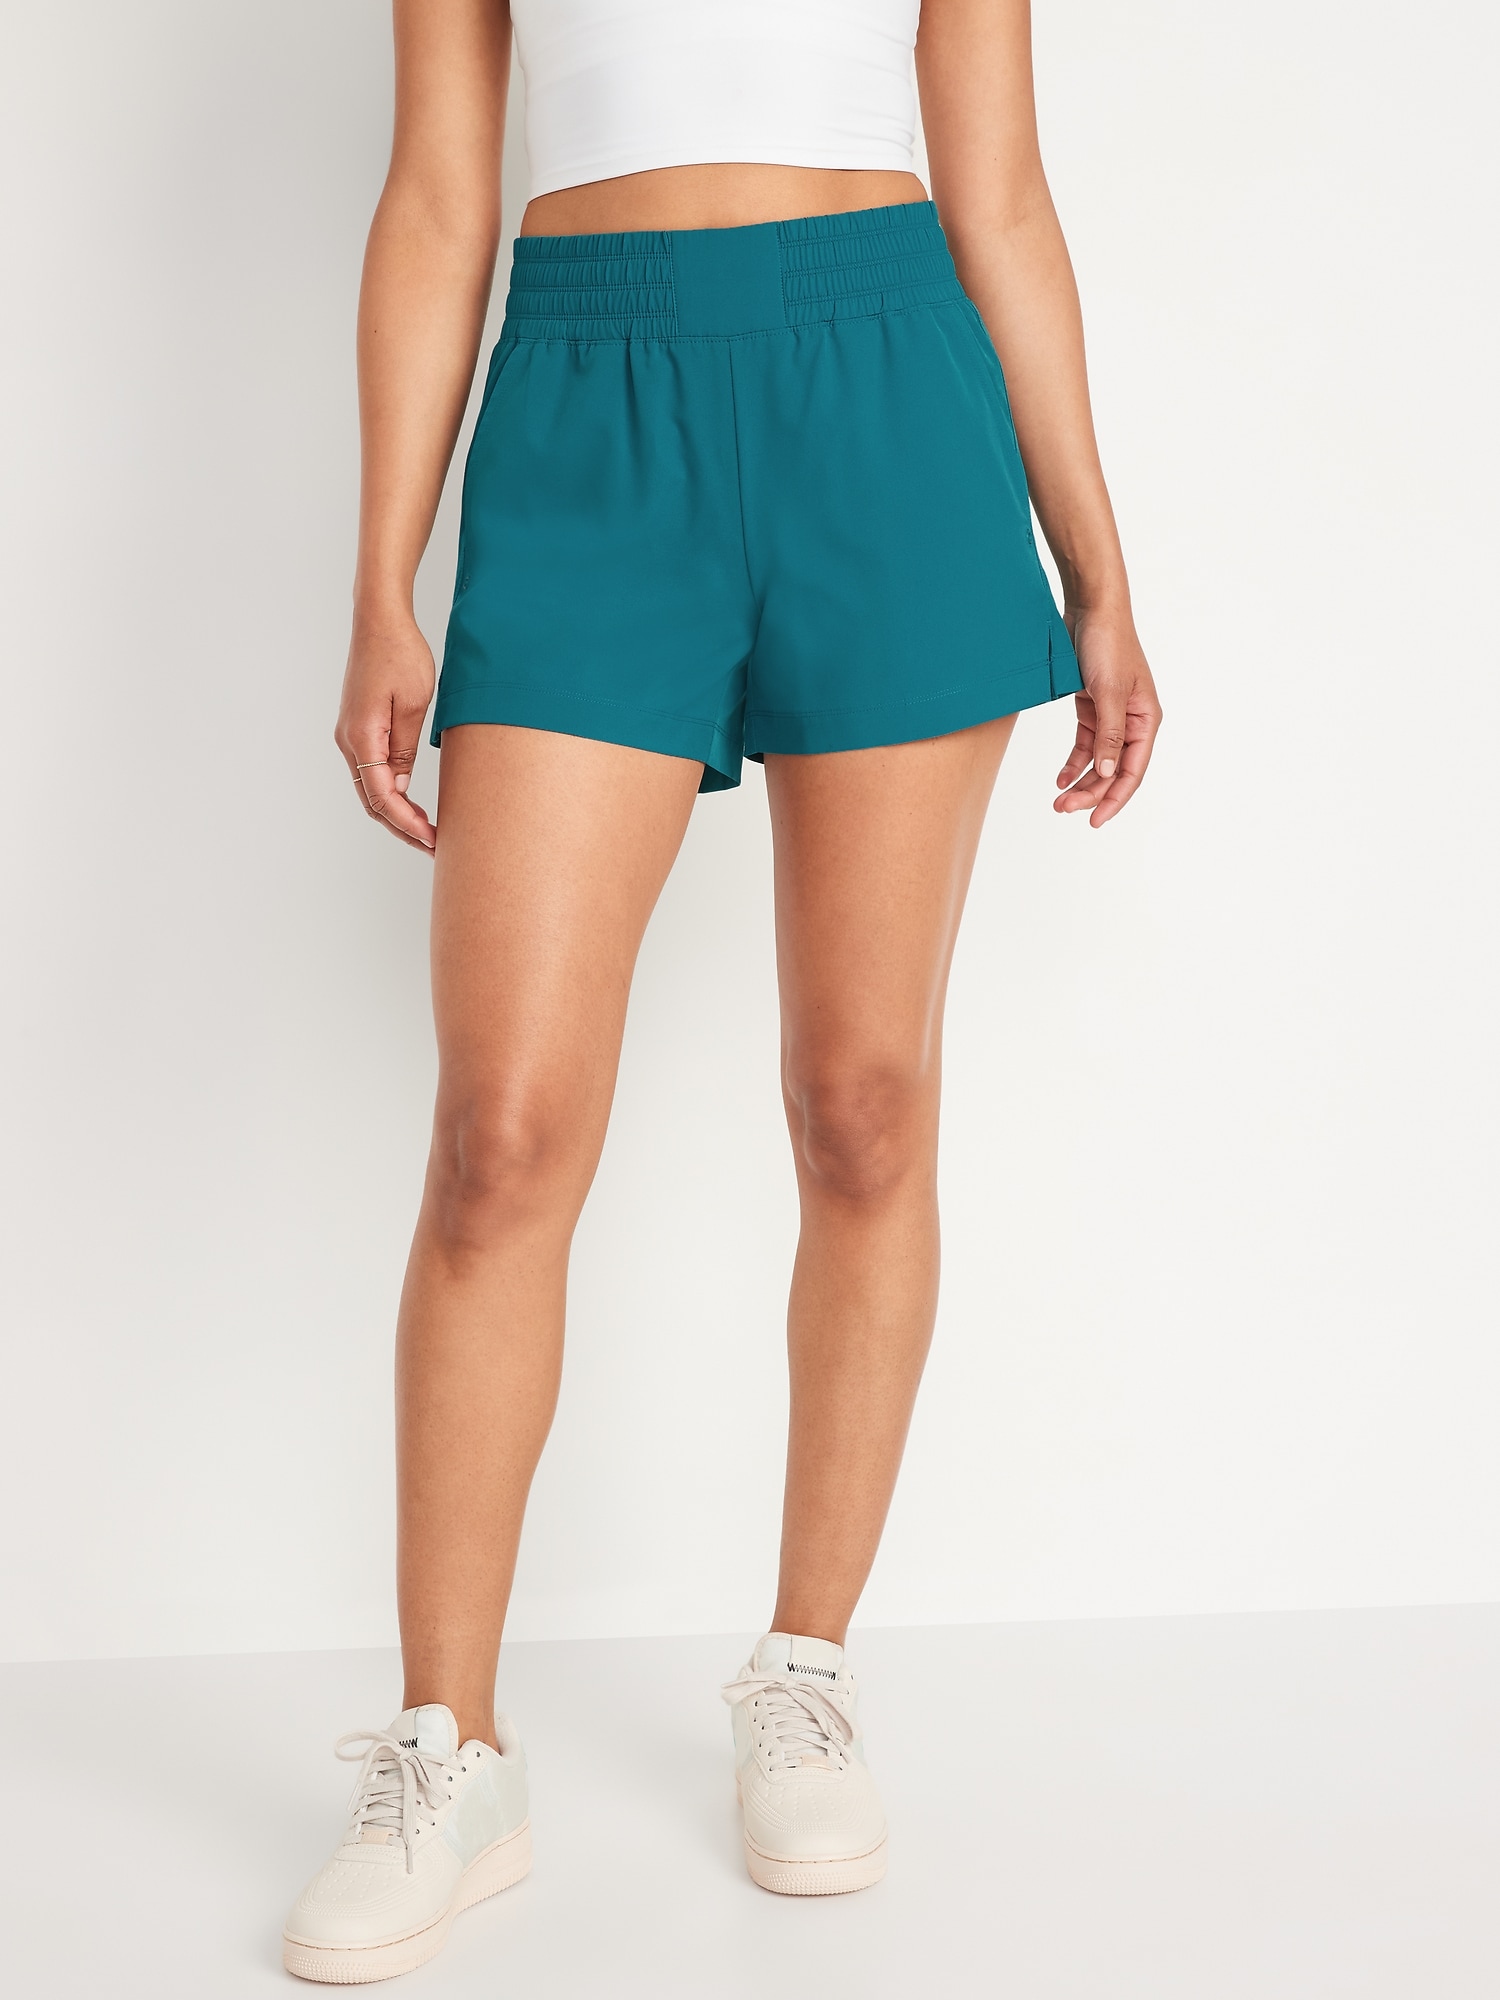 Old Navy High-Waisted StretchTech Shorts - 4-inch inseam